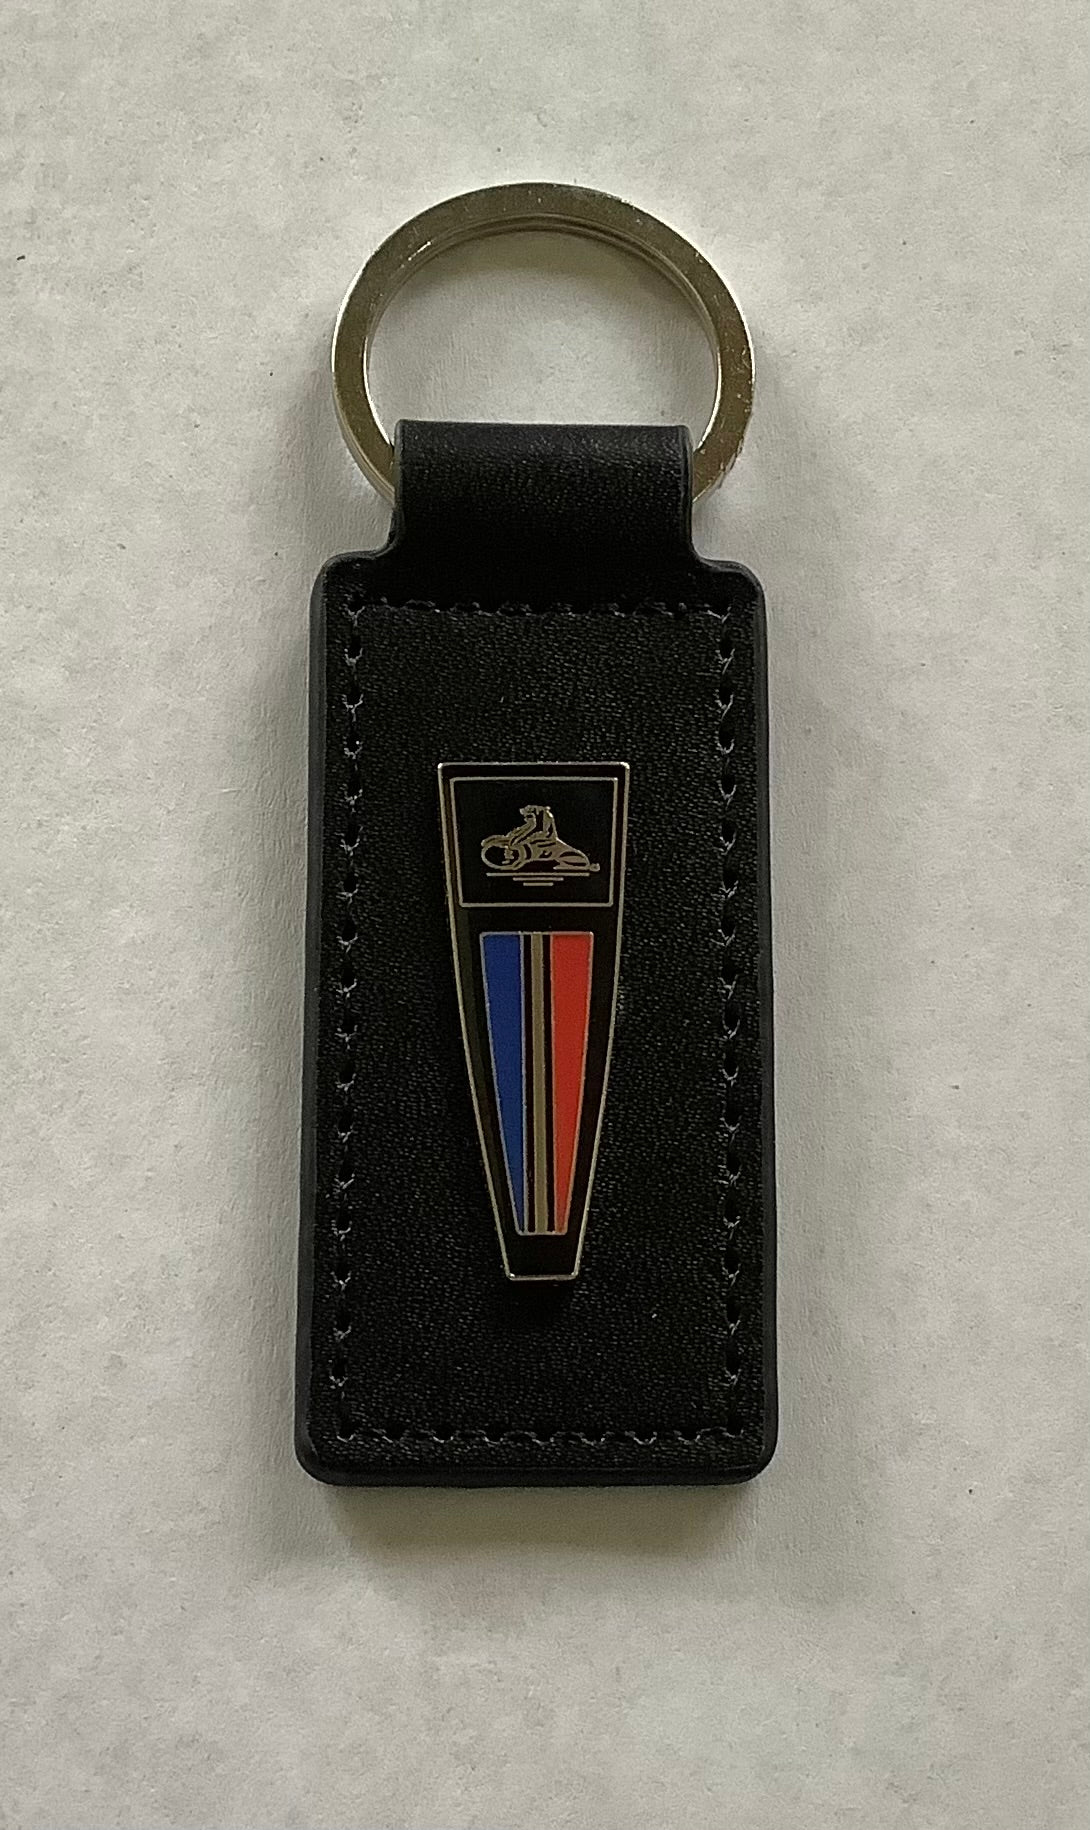 EJ-EH Holden Leather Key Ring